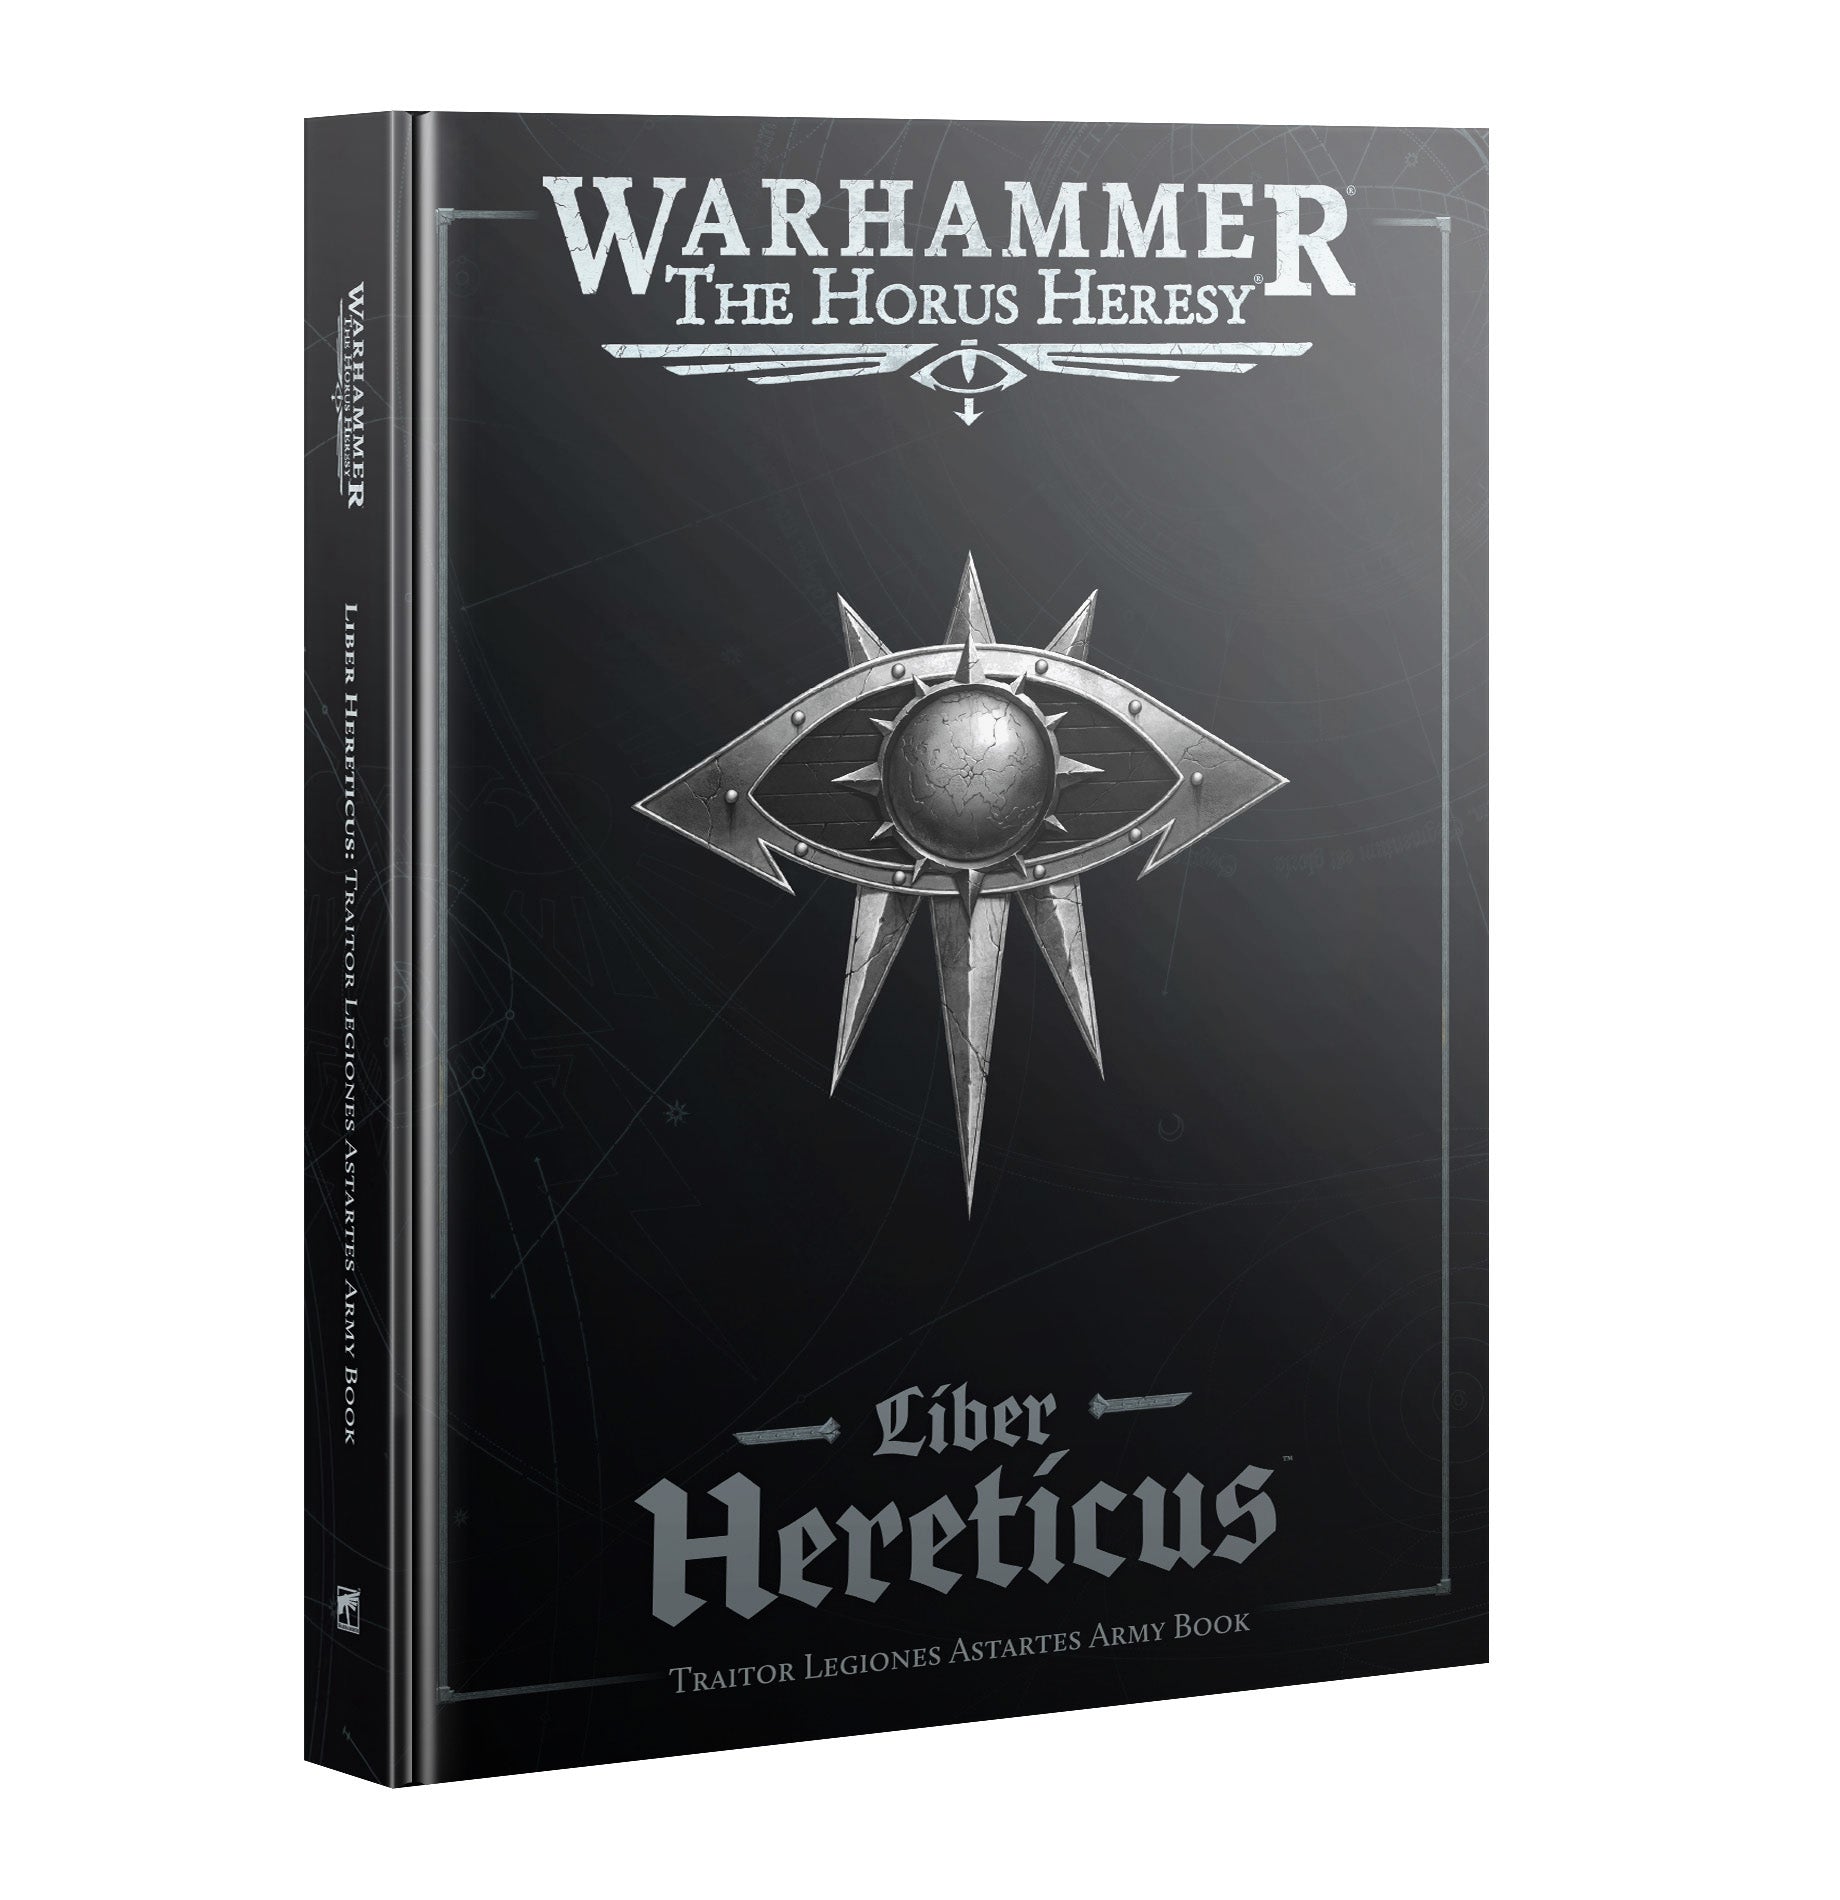 Copy of Warhammer - The Horus Heresy - Liber Hereticus – Traitor Legiones Astartes Army Book | RetroPlay Games